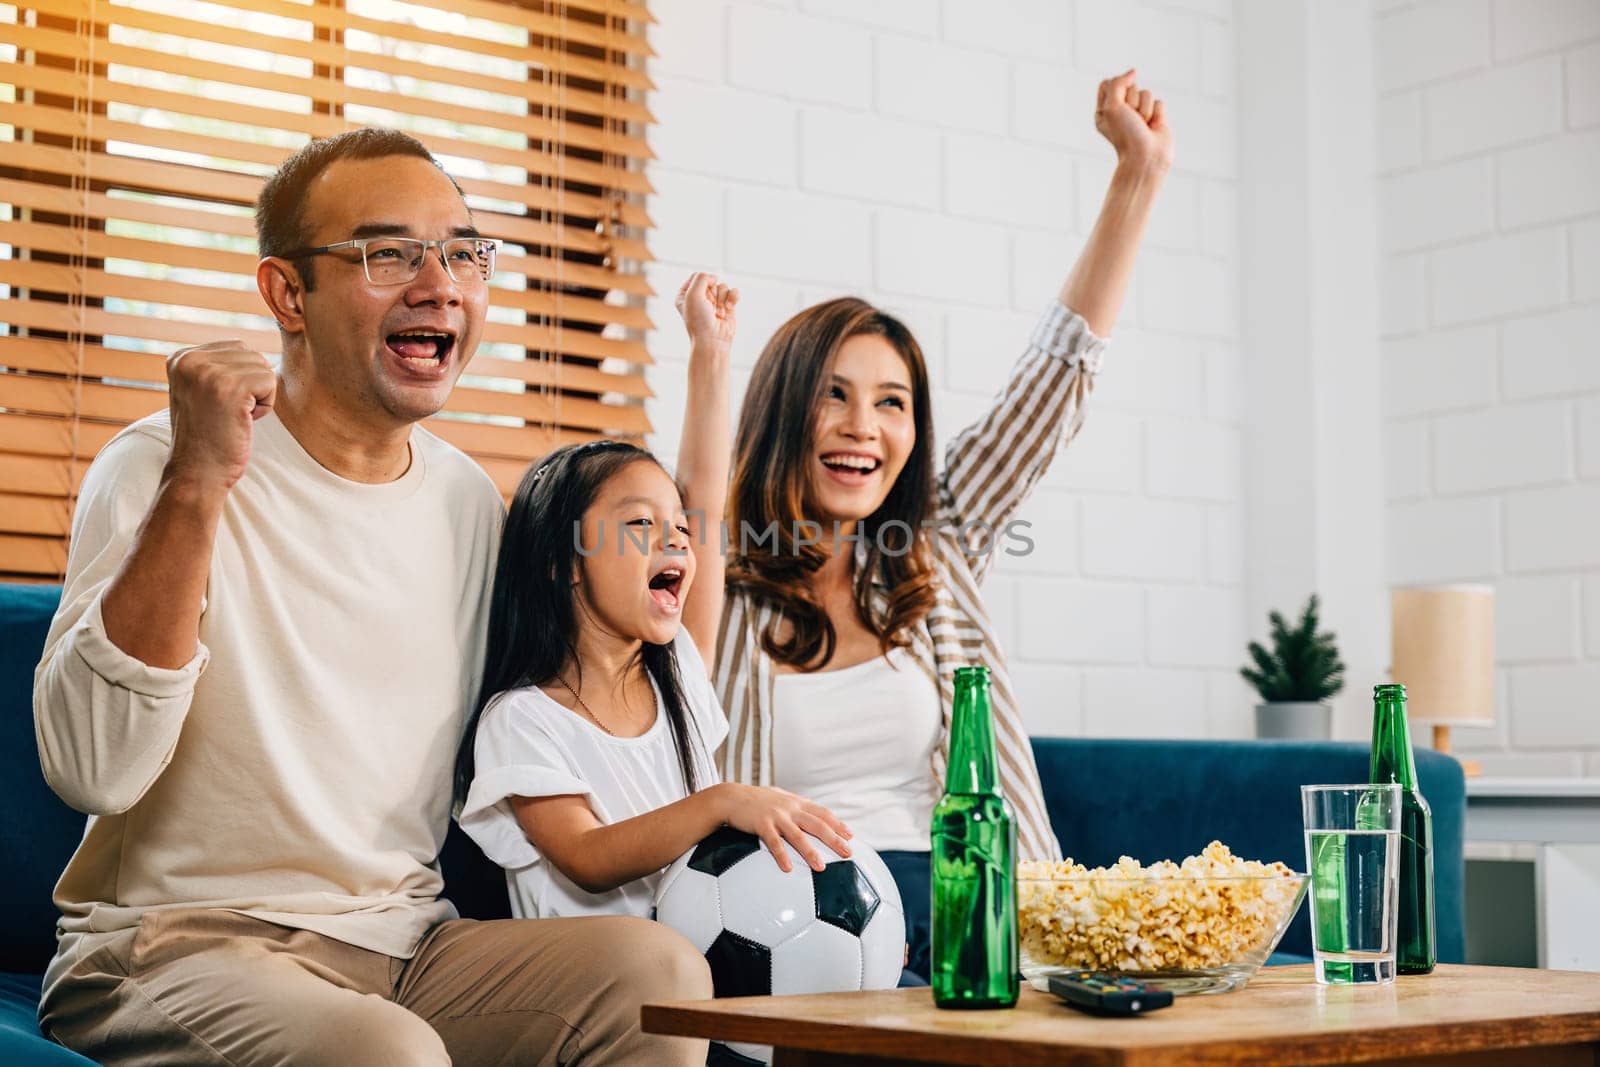 With popcorn in hand, a family of fans watches a football match on TV, fostering togetherness and excitement. Their cheers and laughter capture the joy of the game and celebrating a triumph.